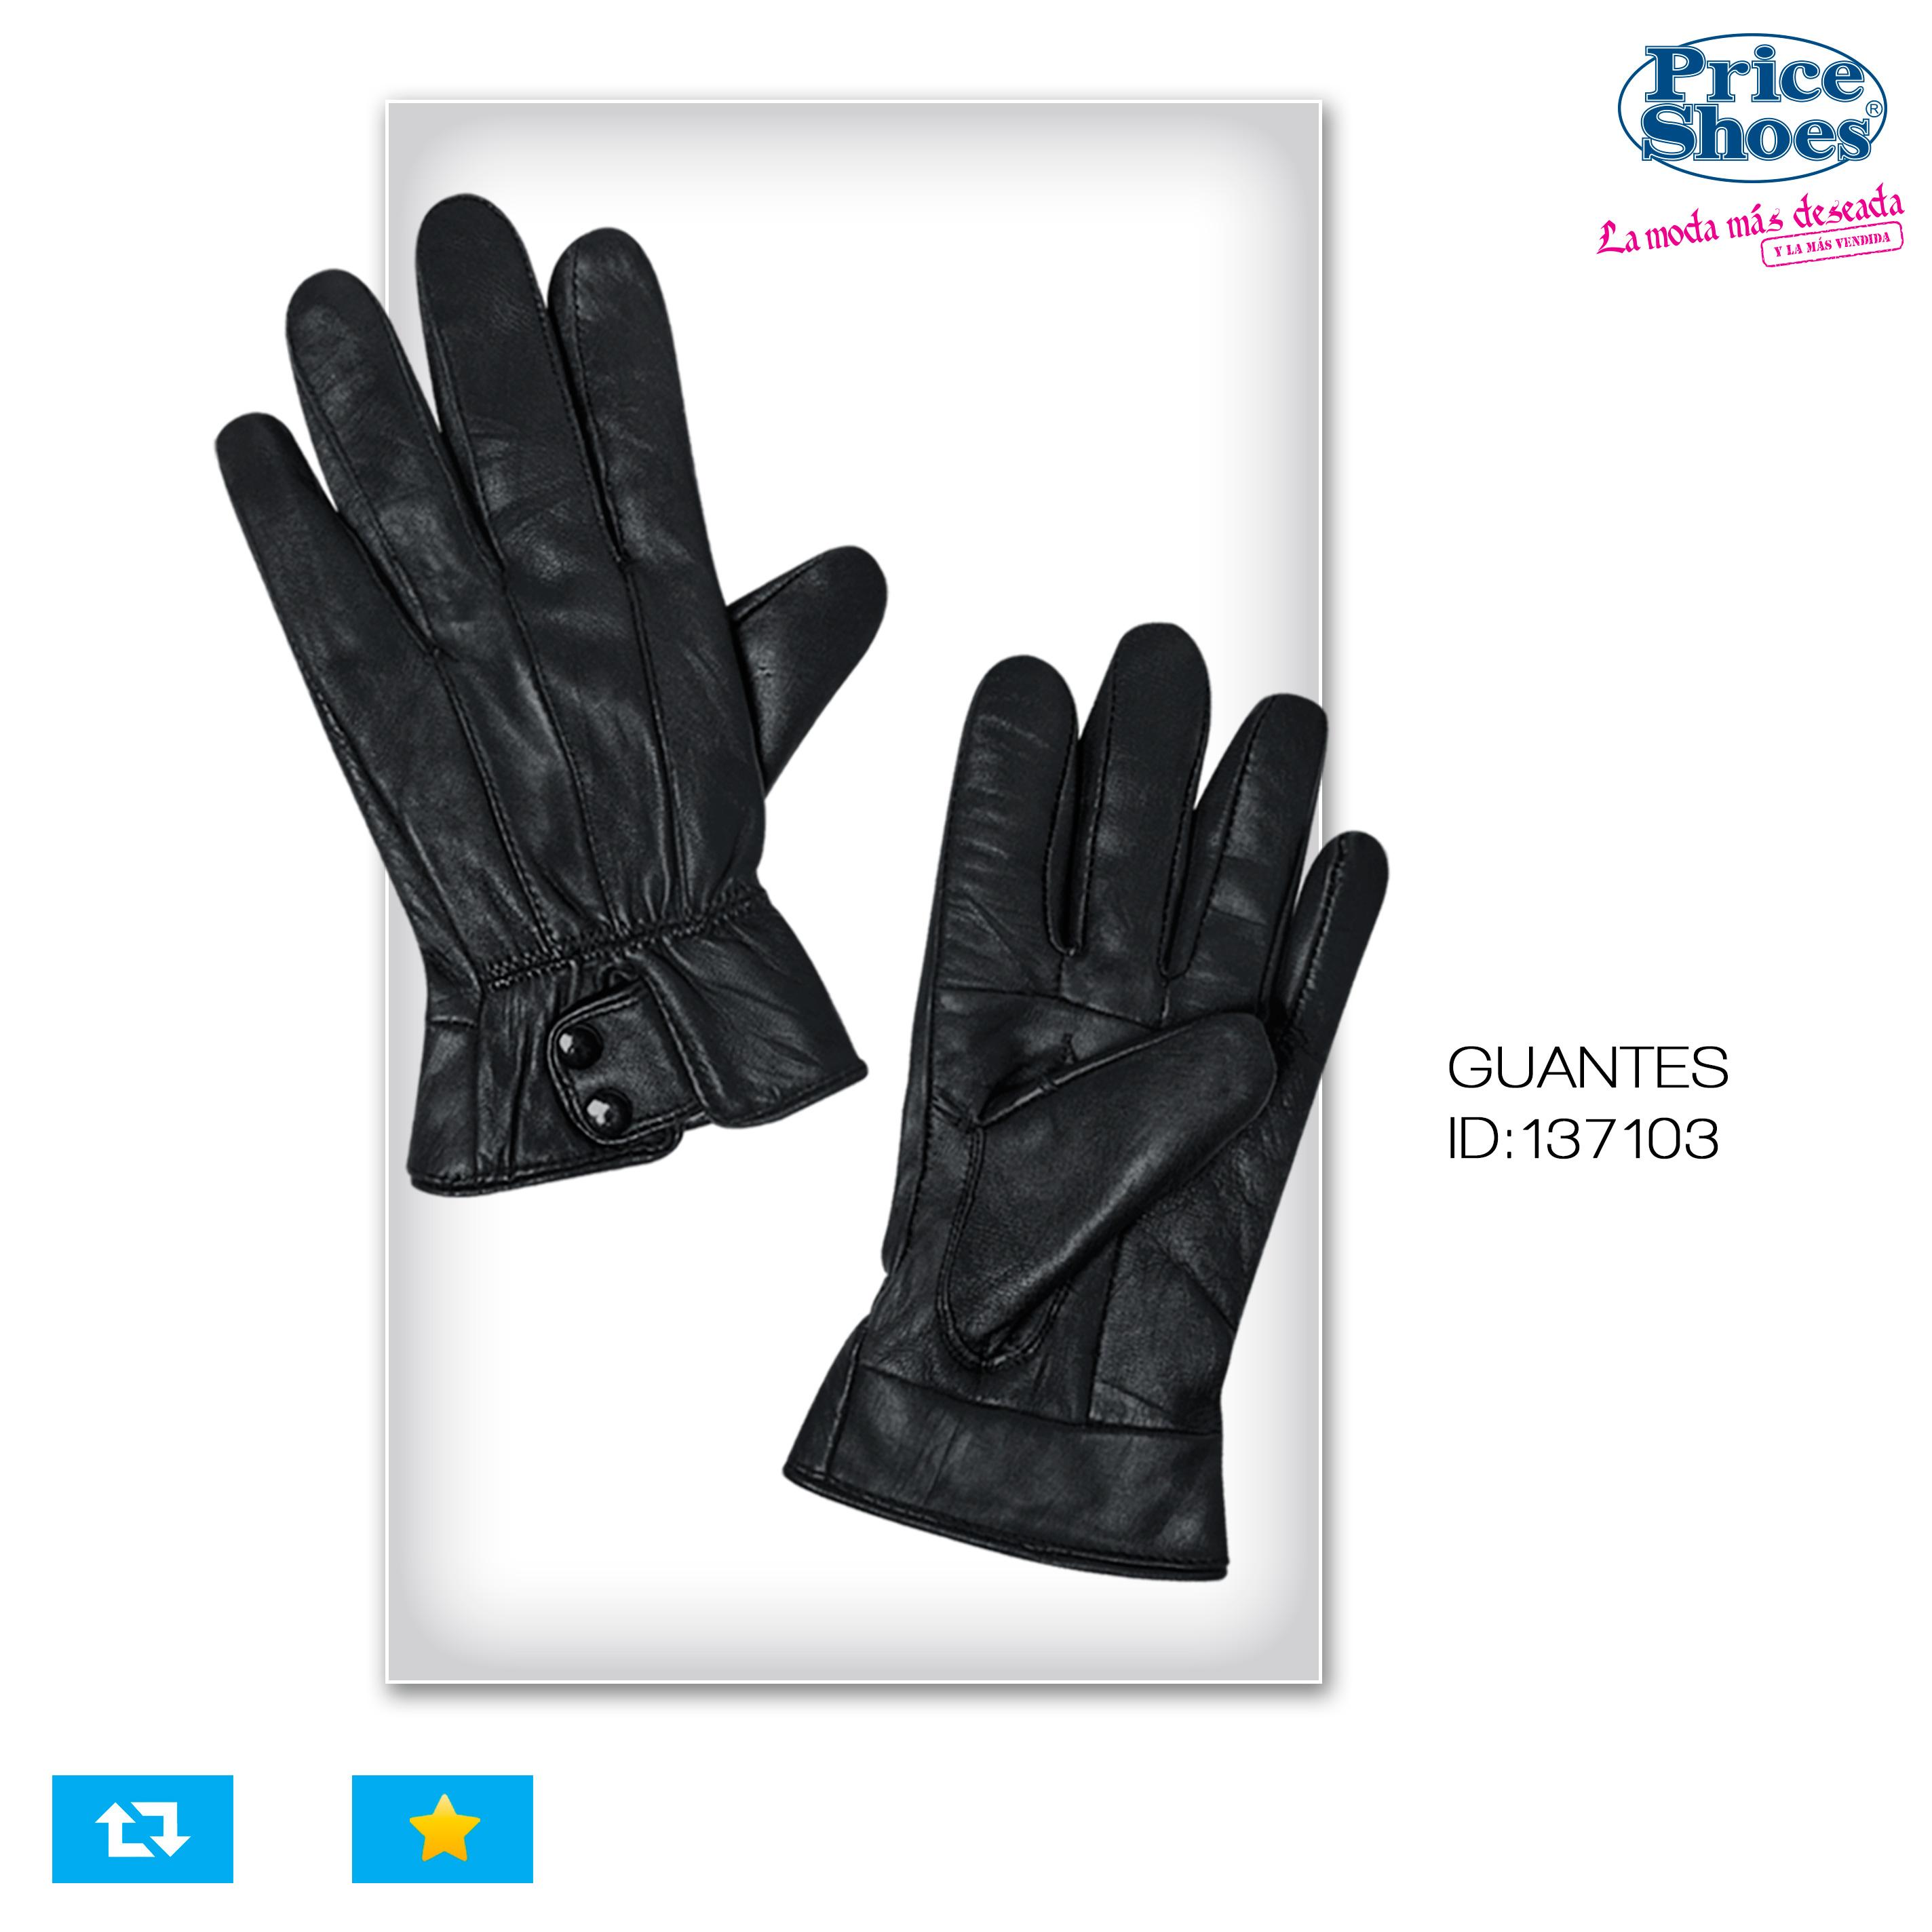 Total 23+ imagen guantes price shoes